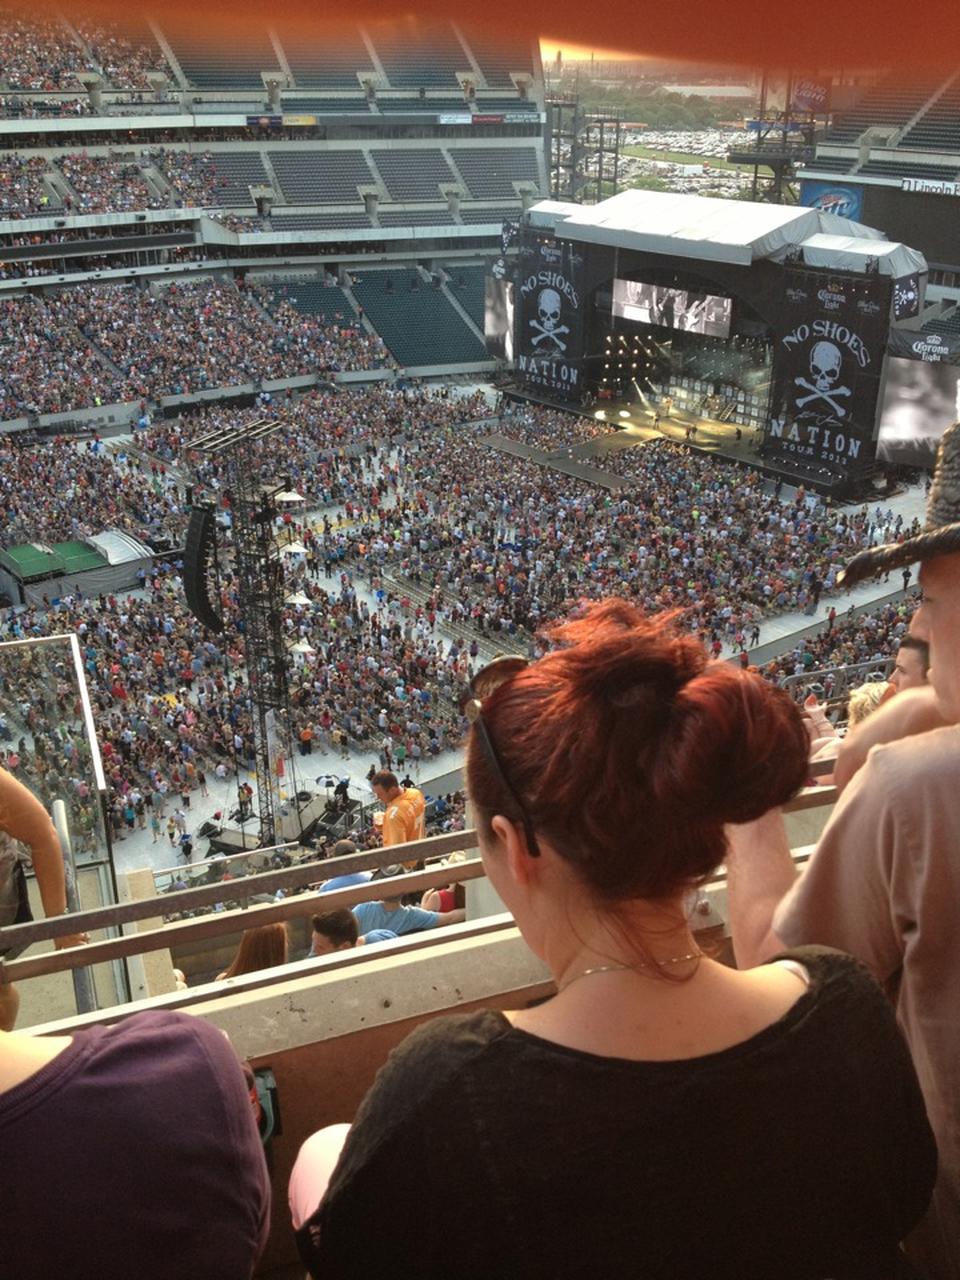 Section 221 at Lincoln Financial Field for Concerts